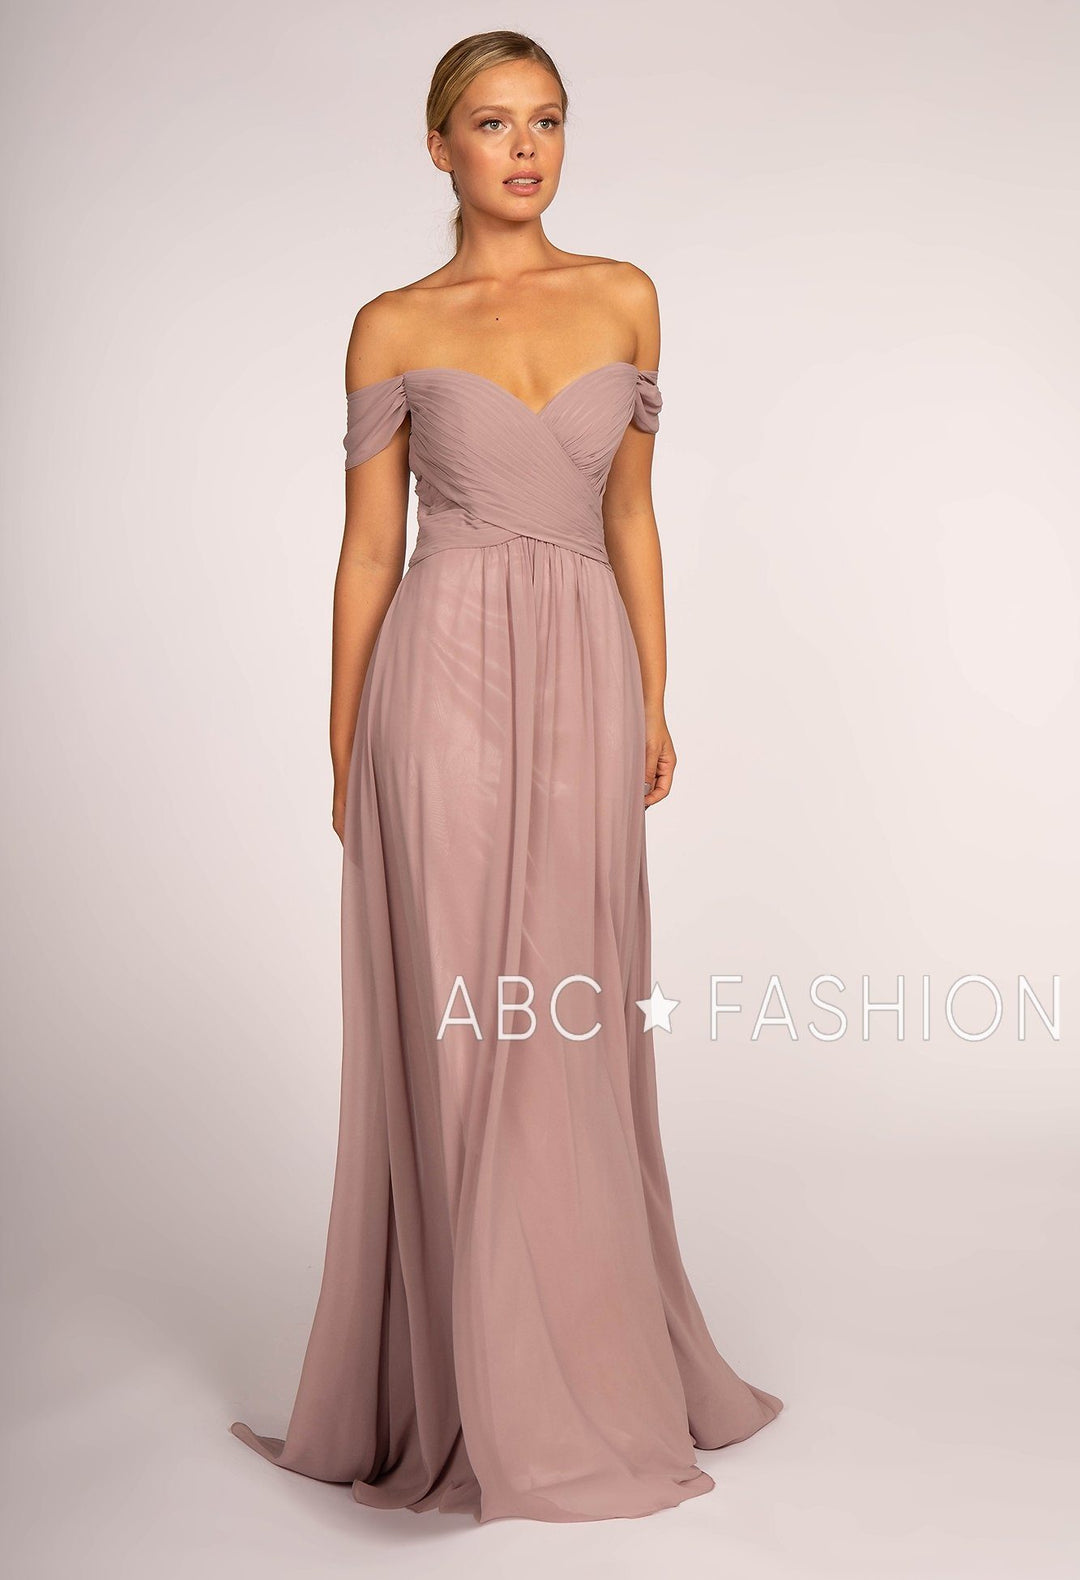 Long Off the Shoulder Dress with Pleated Bodice by Elizabeth K GL2550-Long Formal Dresses-ABC Fashion